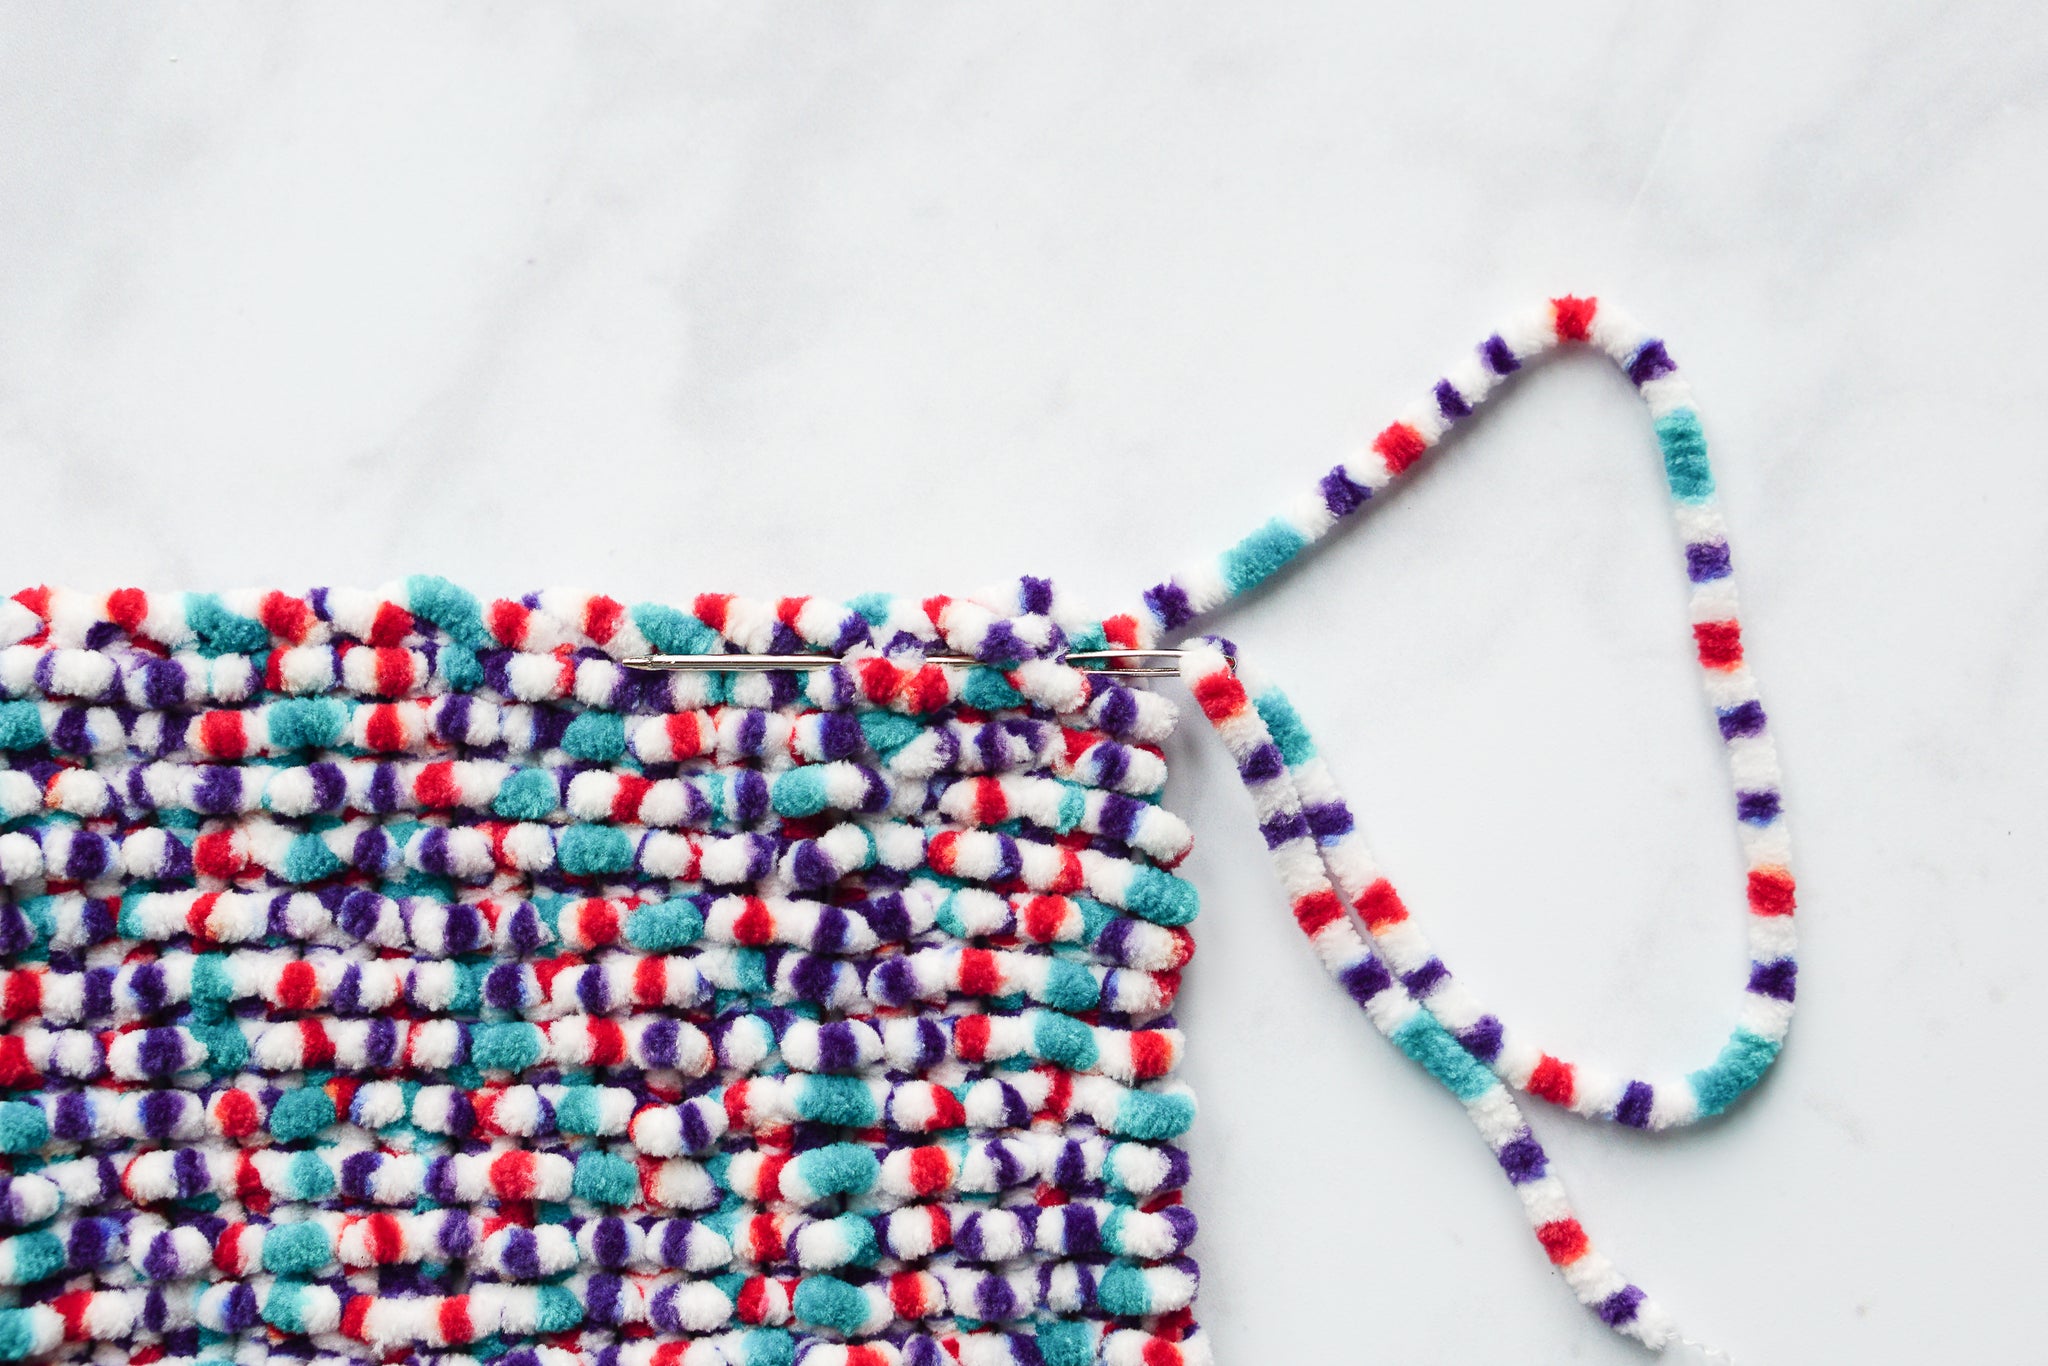 Knit a snuggly blanket for your child's doll's pram